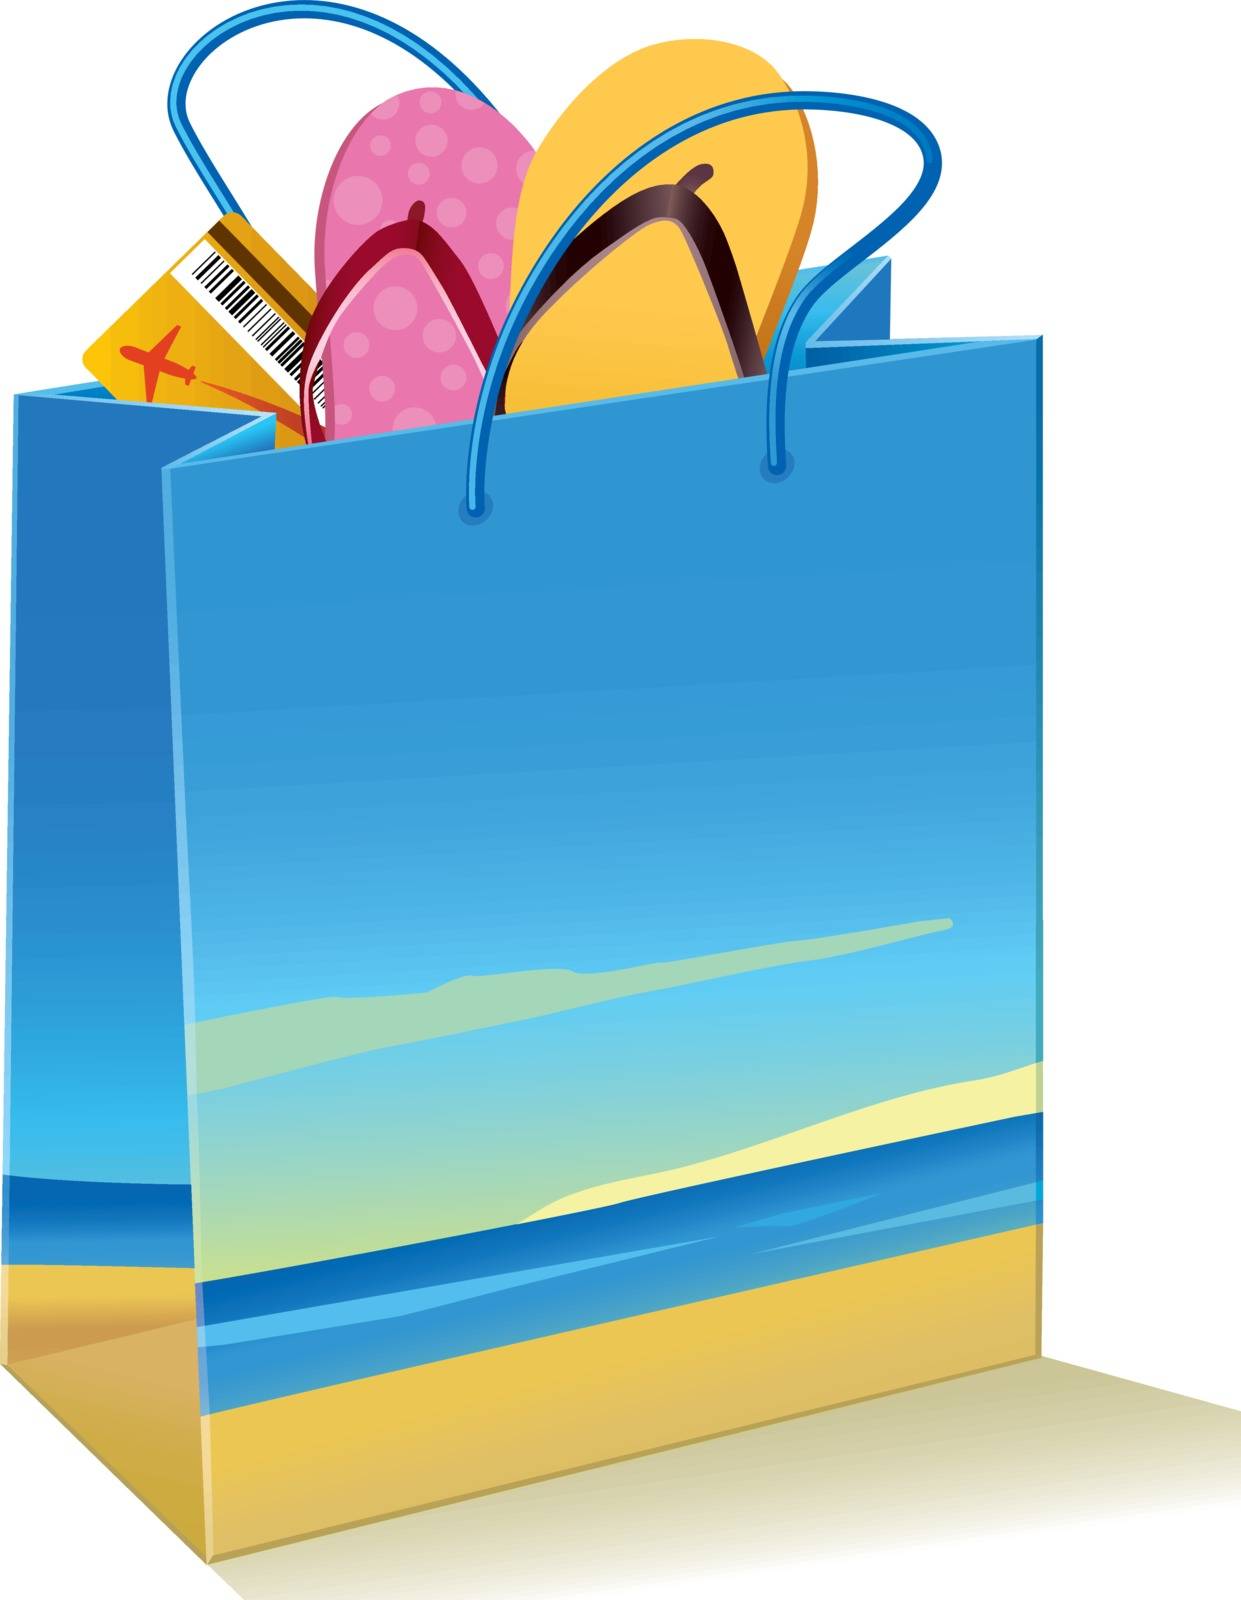 Sandals and flight ticket into a paper bag with a picture of a beach.
Useful image to promote holiday packages